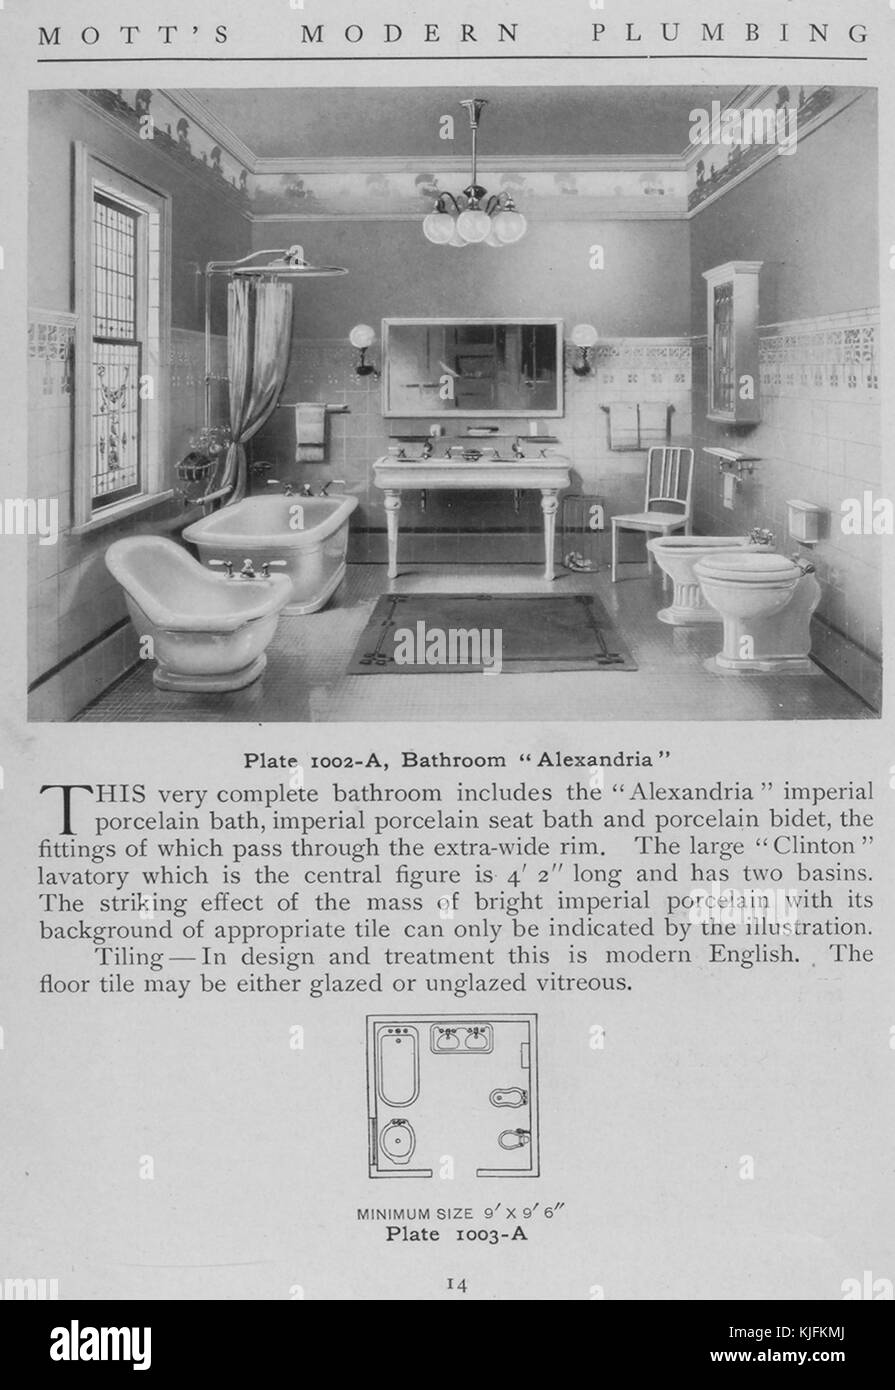 Bathroom, Alexandria style, 1911. From the New York Public Library. This plate is from Motts Modern Plumbing, a catalog depicting different styles of bathroom fixtures. Stock Photo